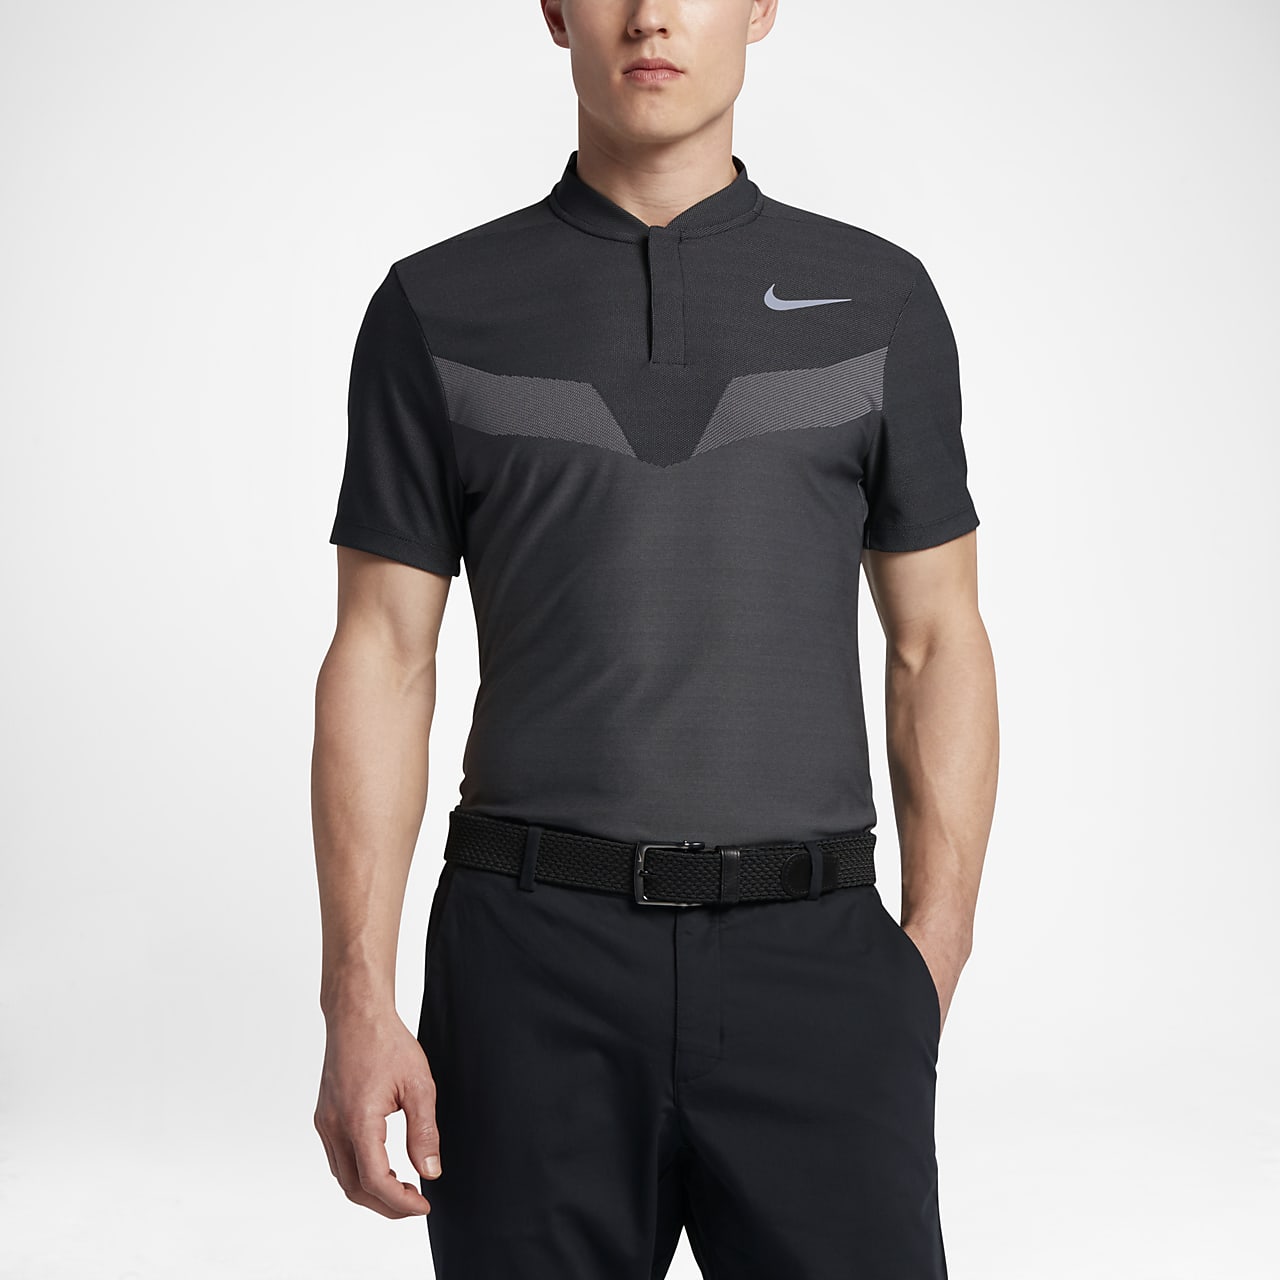 Nike Zonal Cooling Men's Slim Fit Golf Polo